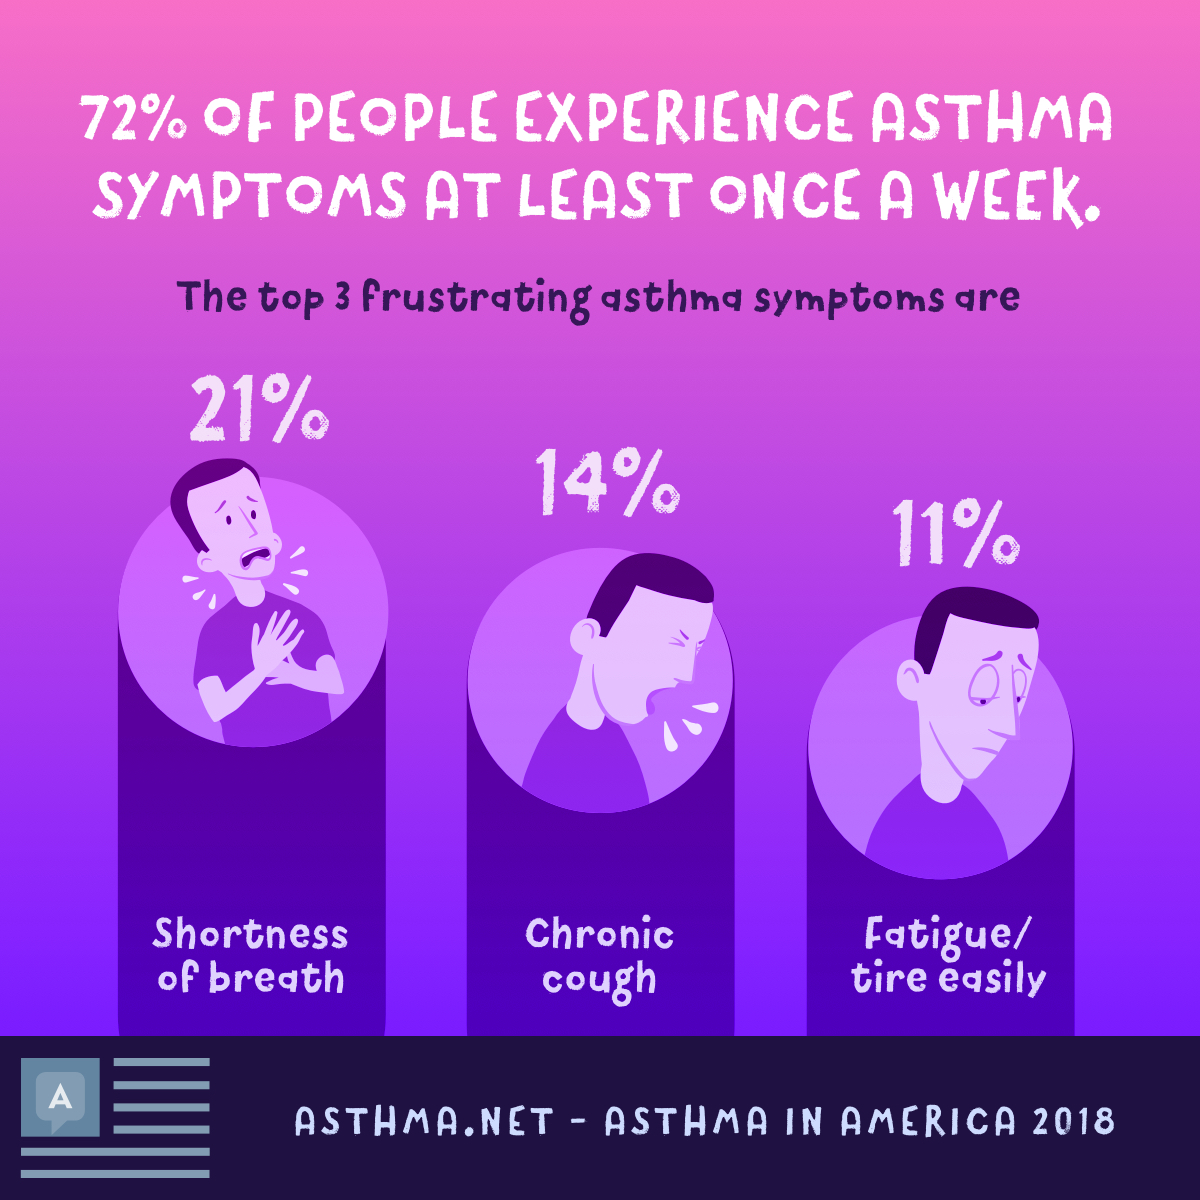 shortness of breath, chronic cough, and fatigue are the top 3 frustrating asthma symptoms